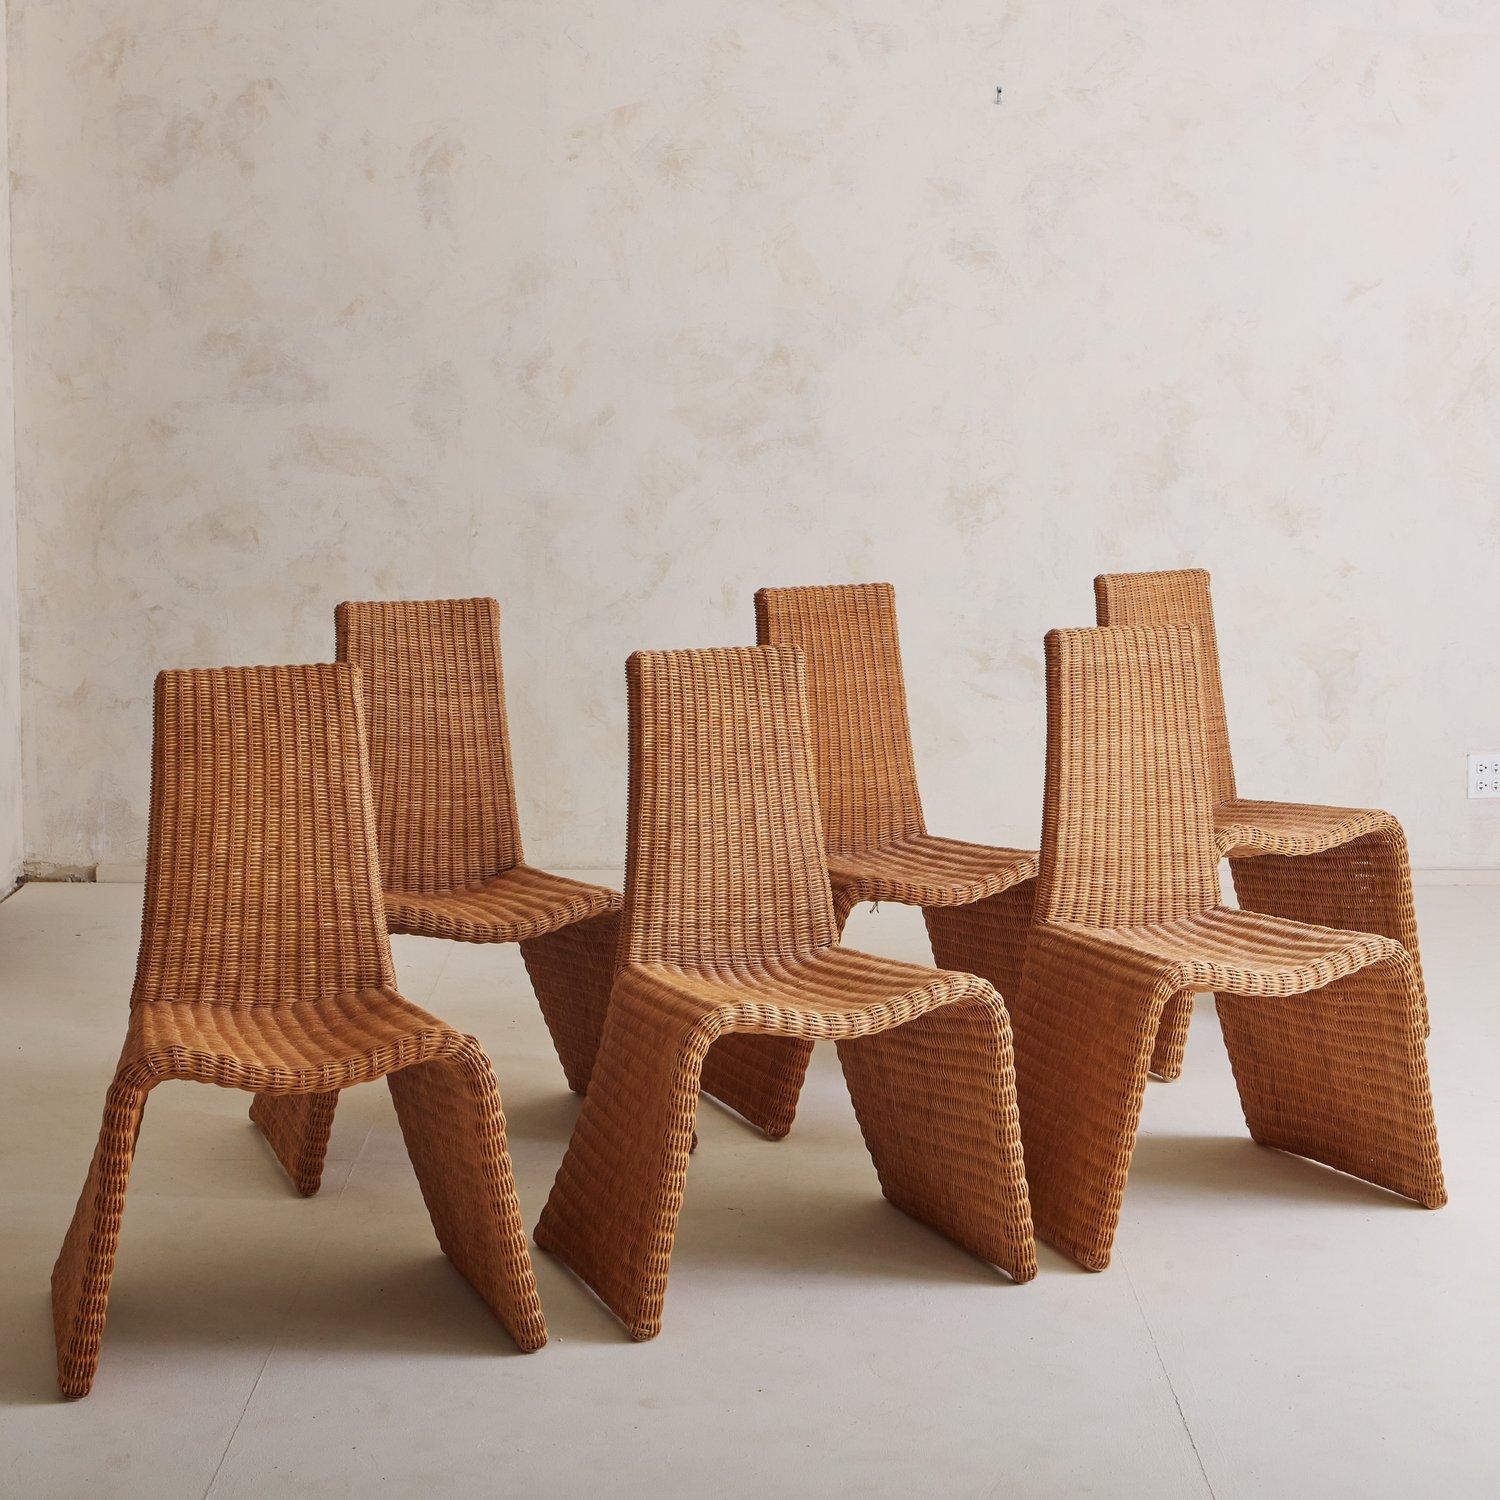 Set of 5 Sculptural Wicker Dining Chairs, Spain 20th Century 2